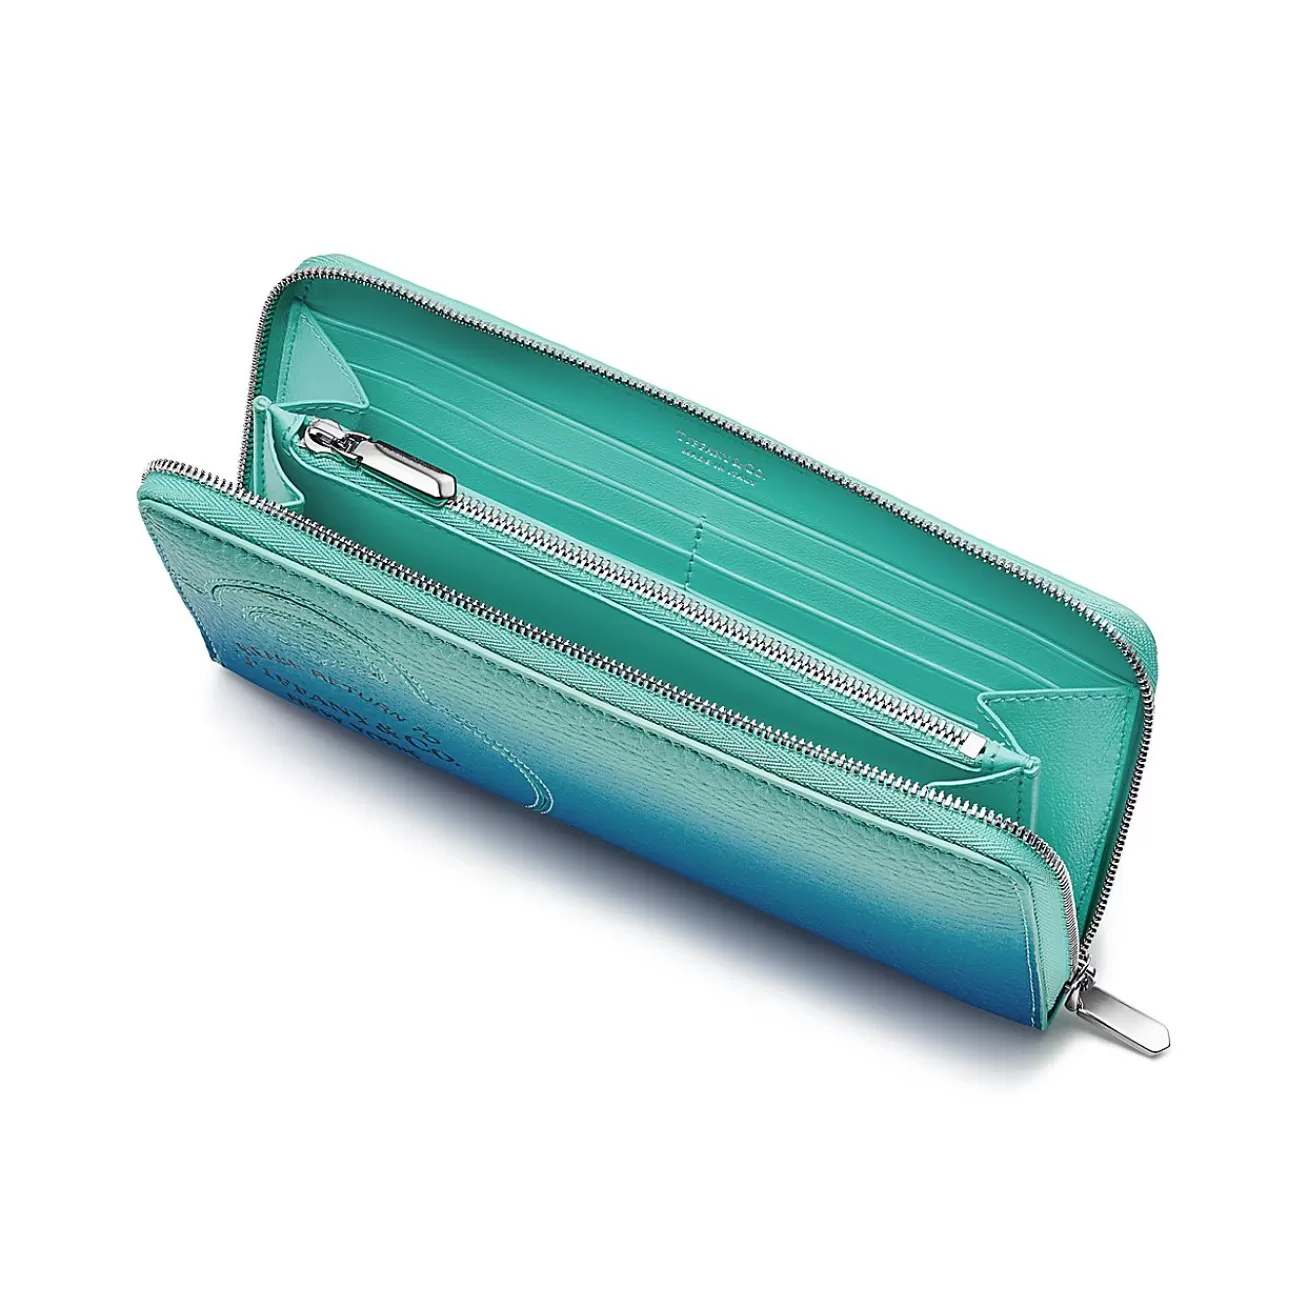 Tiffany & Co. Return to Tiffany® Large Zip Wallet in Infinity Blue Leather | ^Women Small Leather Goods | Women's Accessories